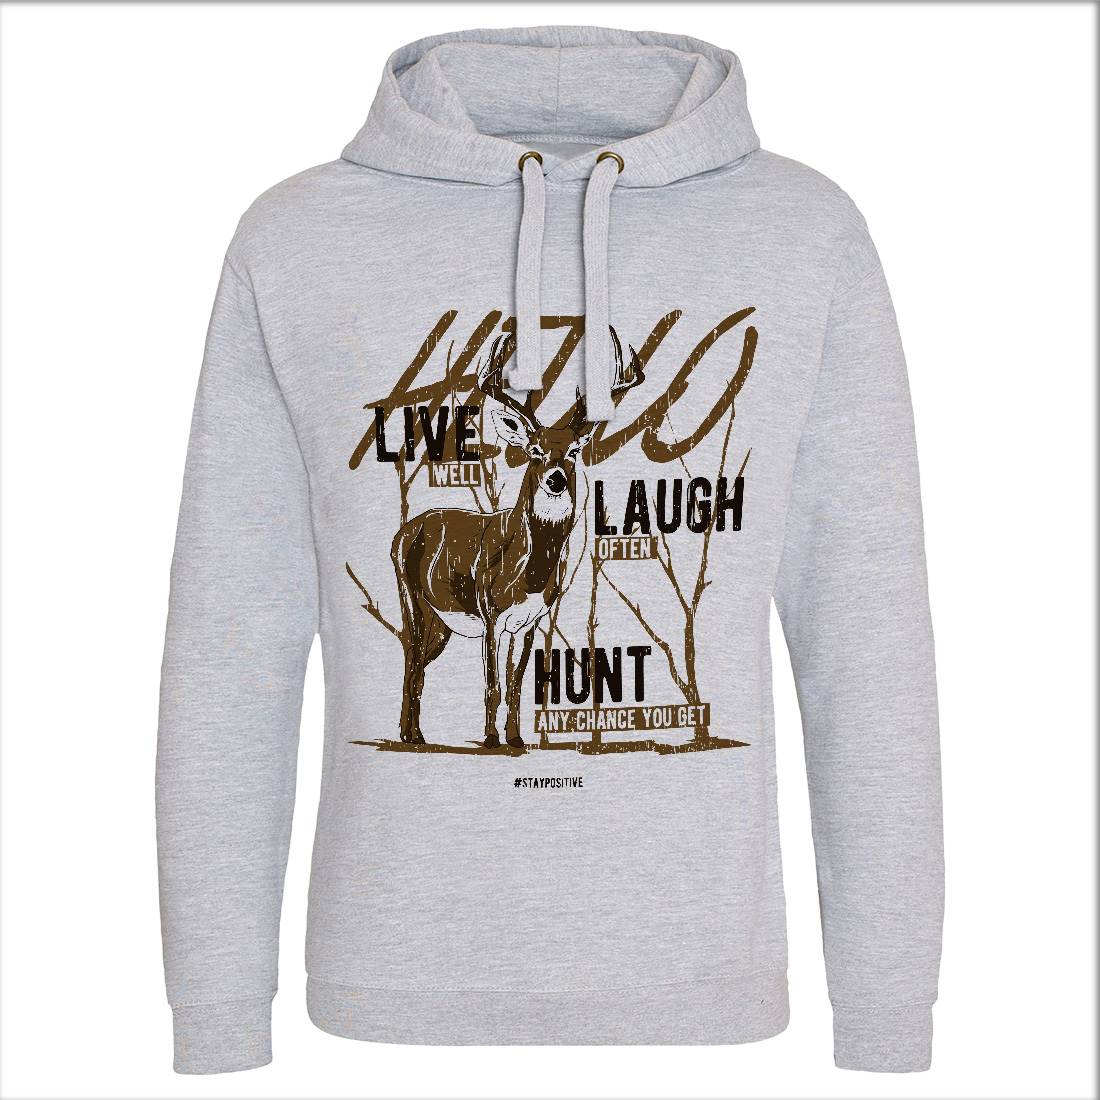 Deer Live Laugh Mens Hoodie Without Pocket Animals B705